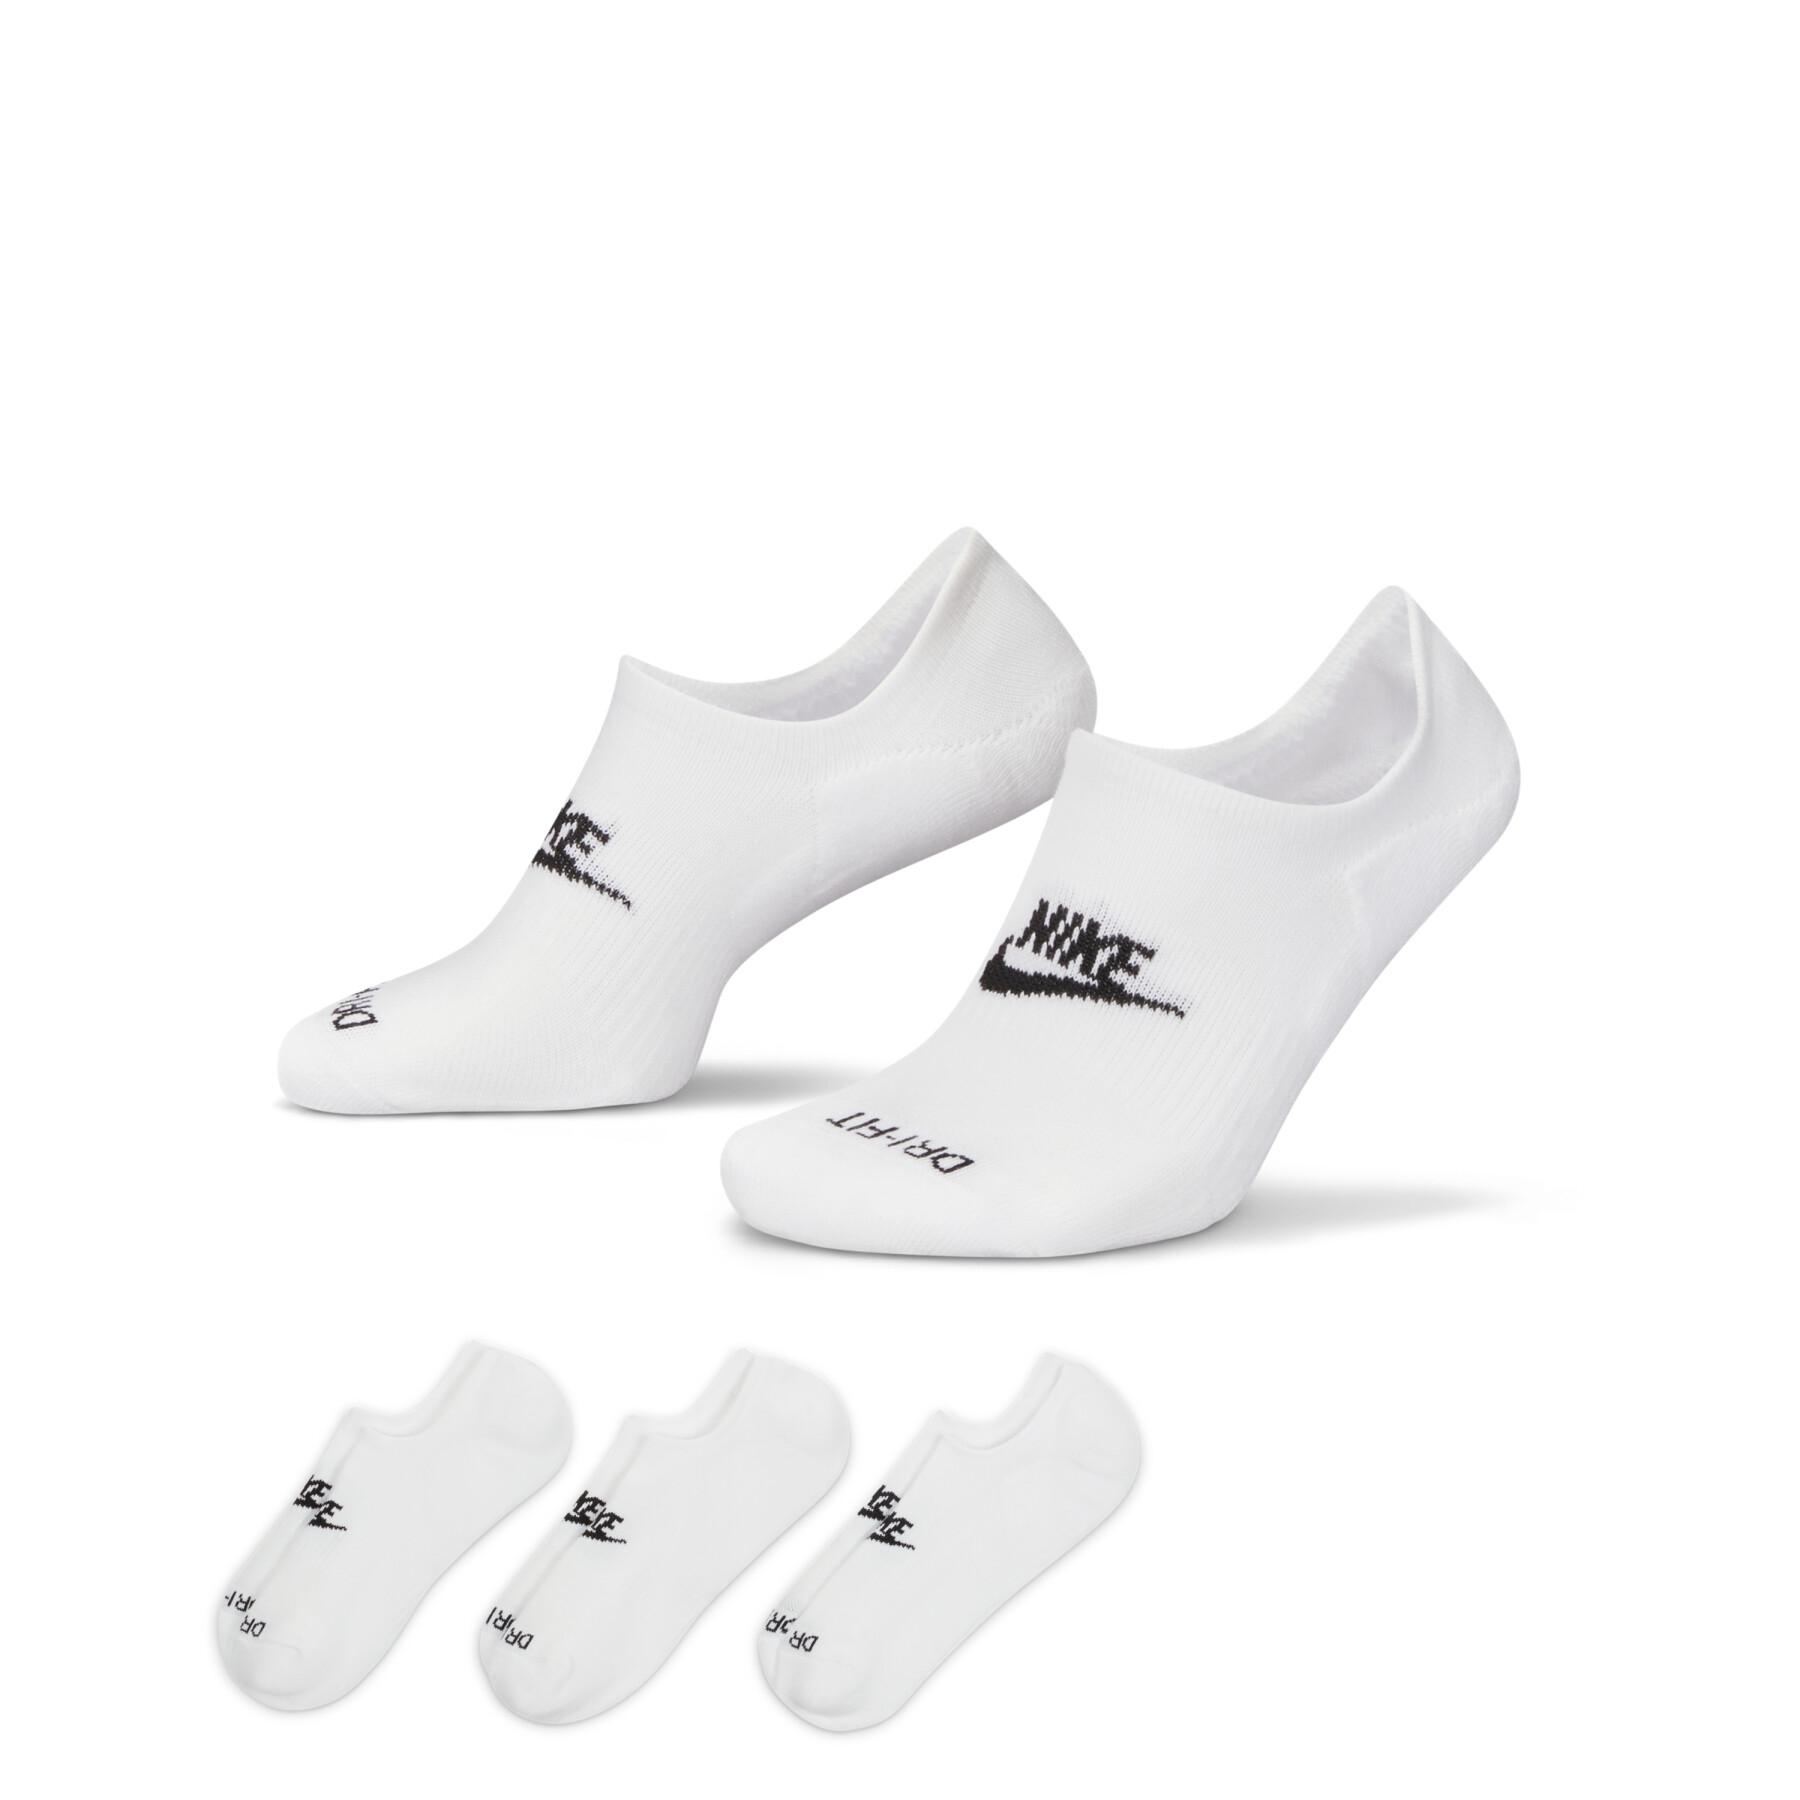 Chaussettes Nike Everyday Plus Cushioned - Chaussettes - Femme - Lifestyle